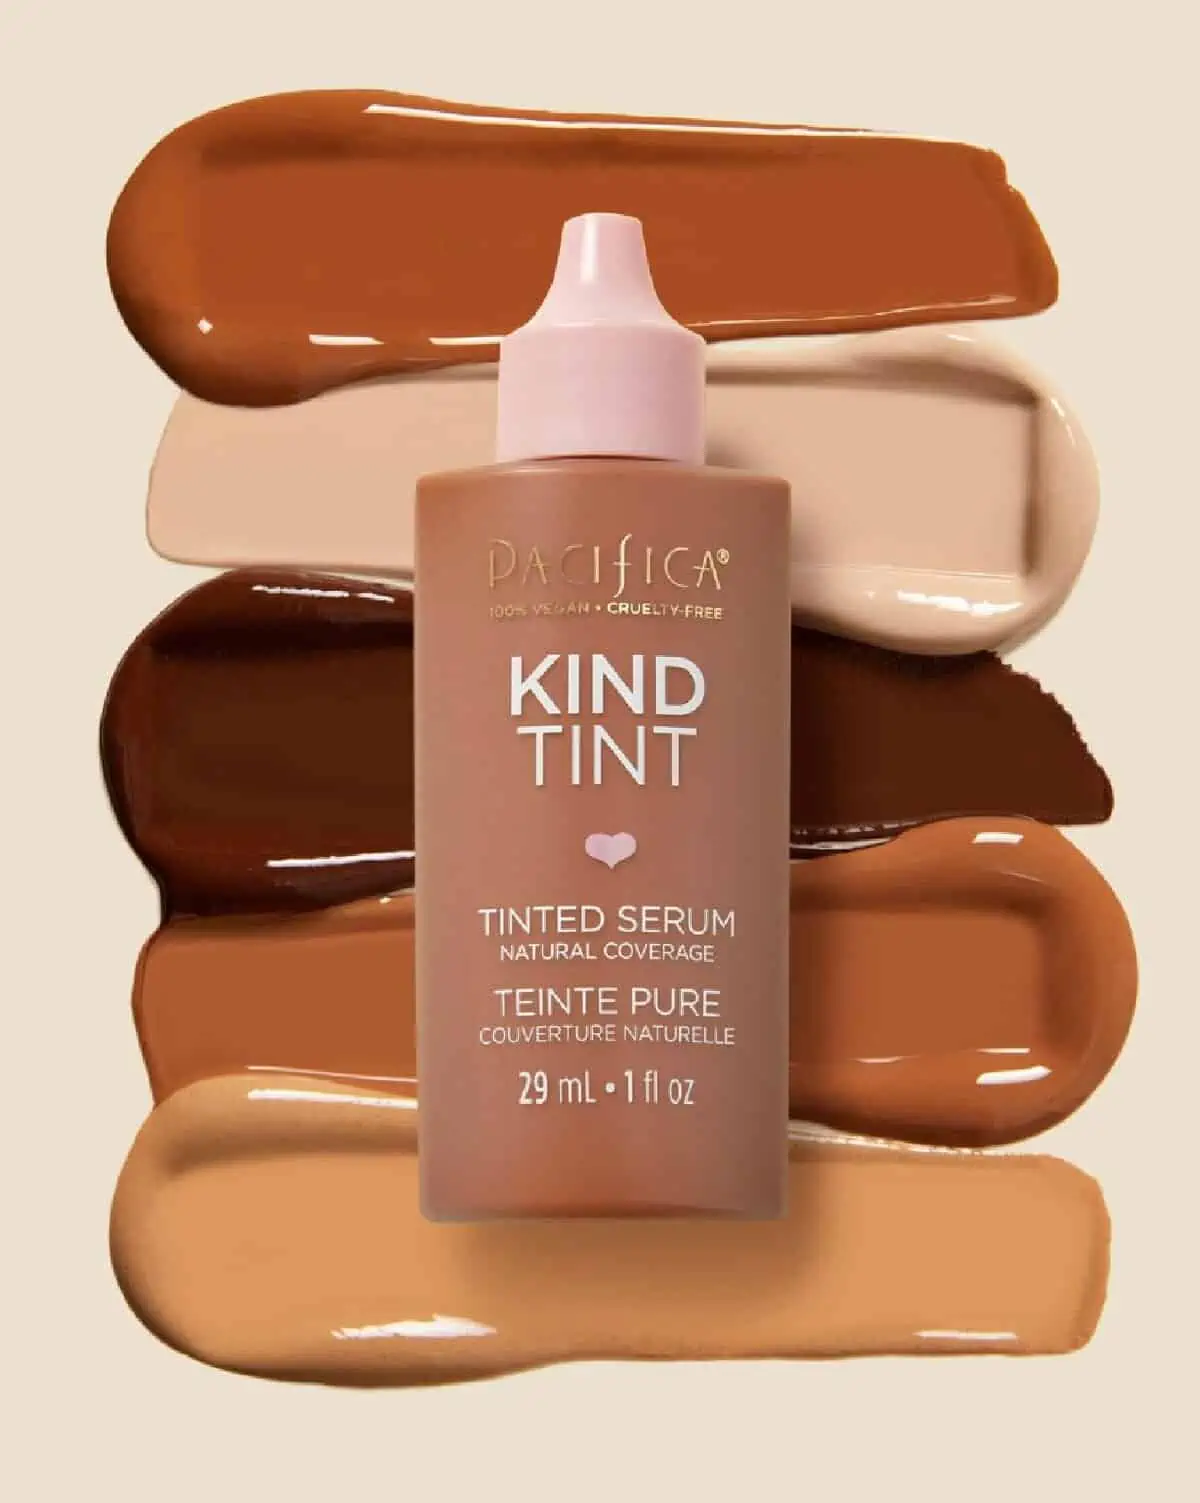 A small squeeze bottle with pink top containing Pacifica Beauty's Kind Tint foundation laying atop of five swatches of foundation colors.